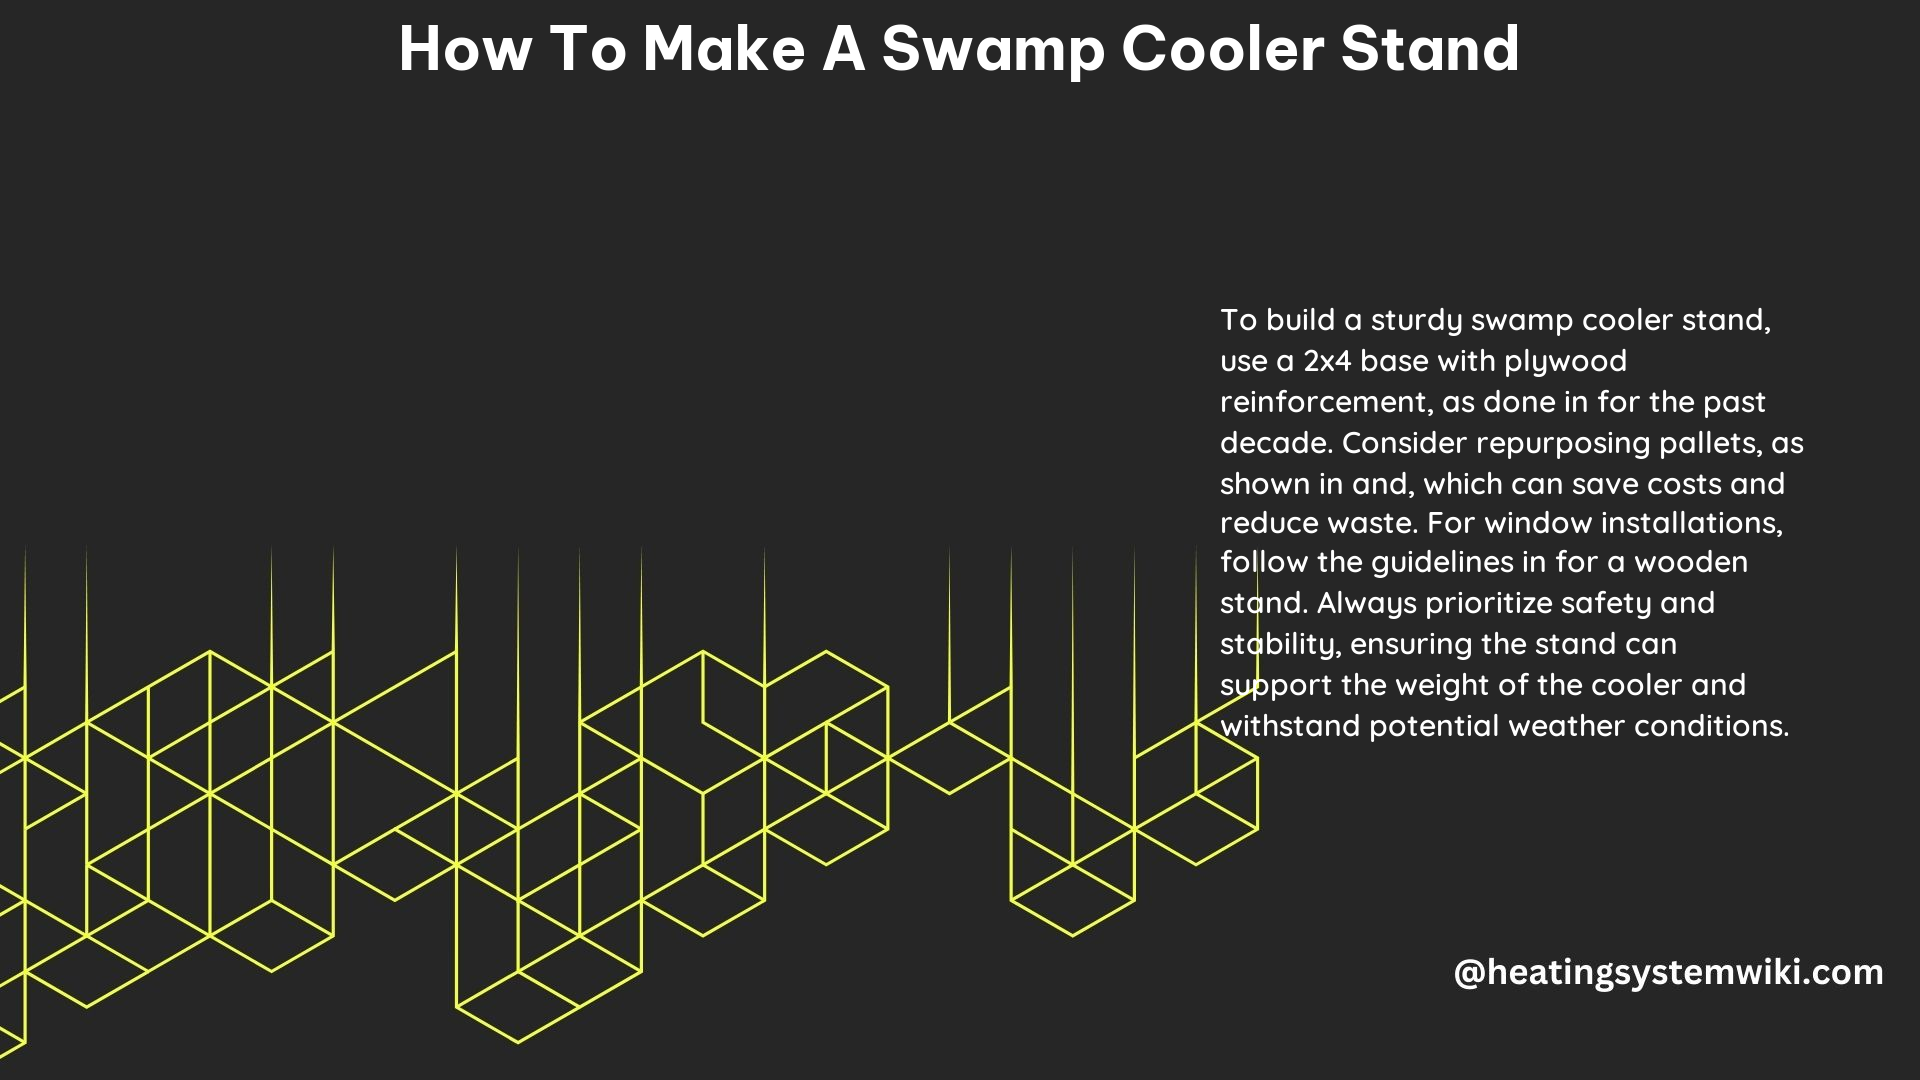 How to Make a Swamp Cooler Stand